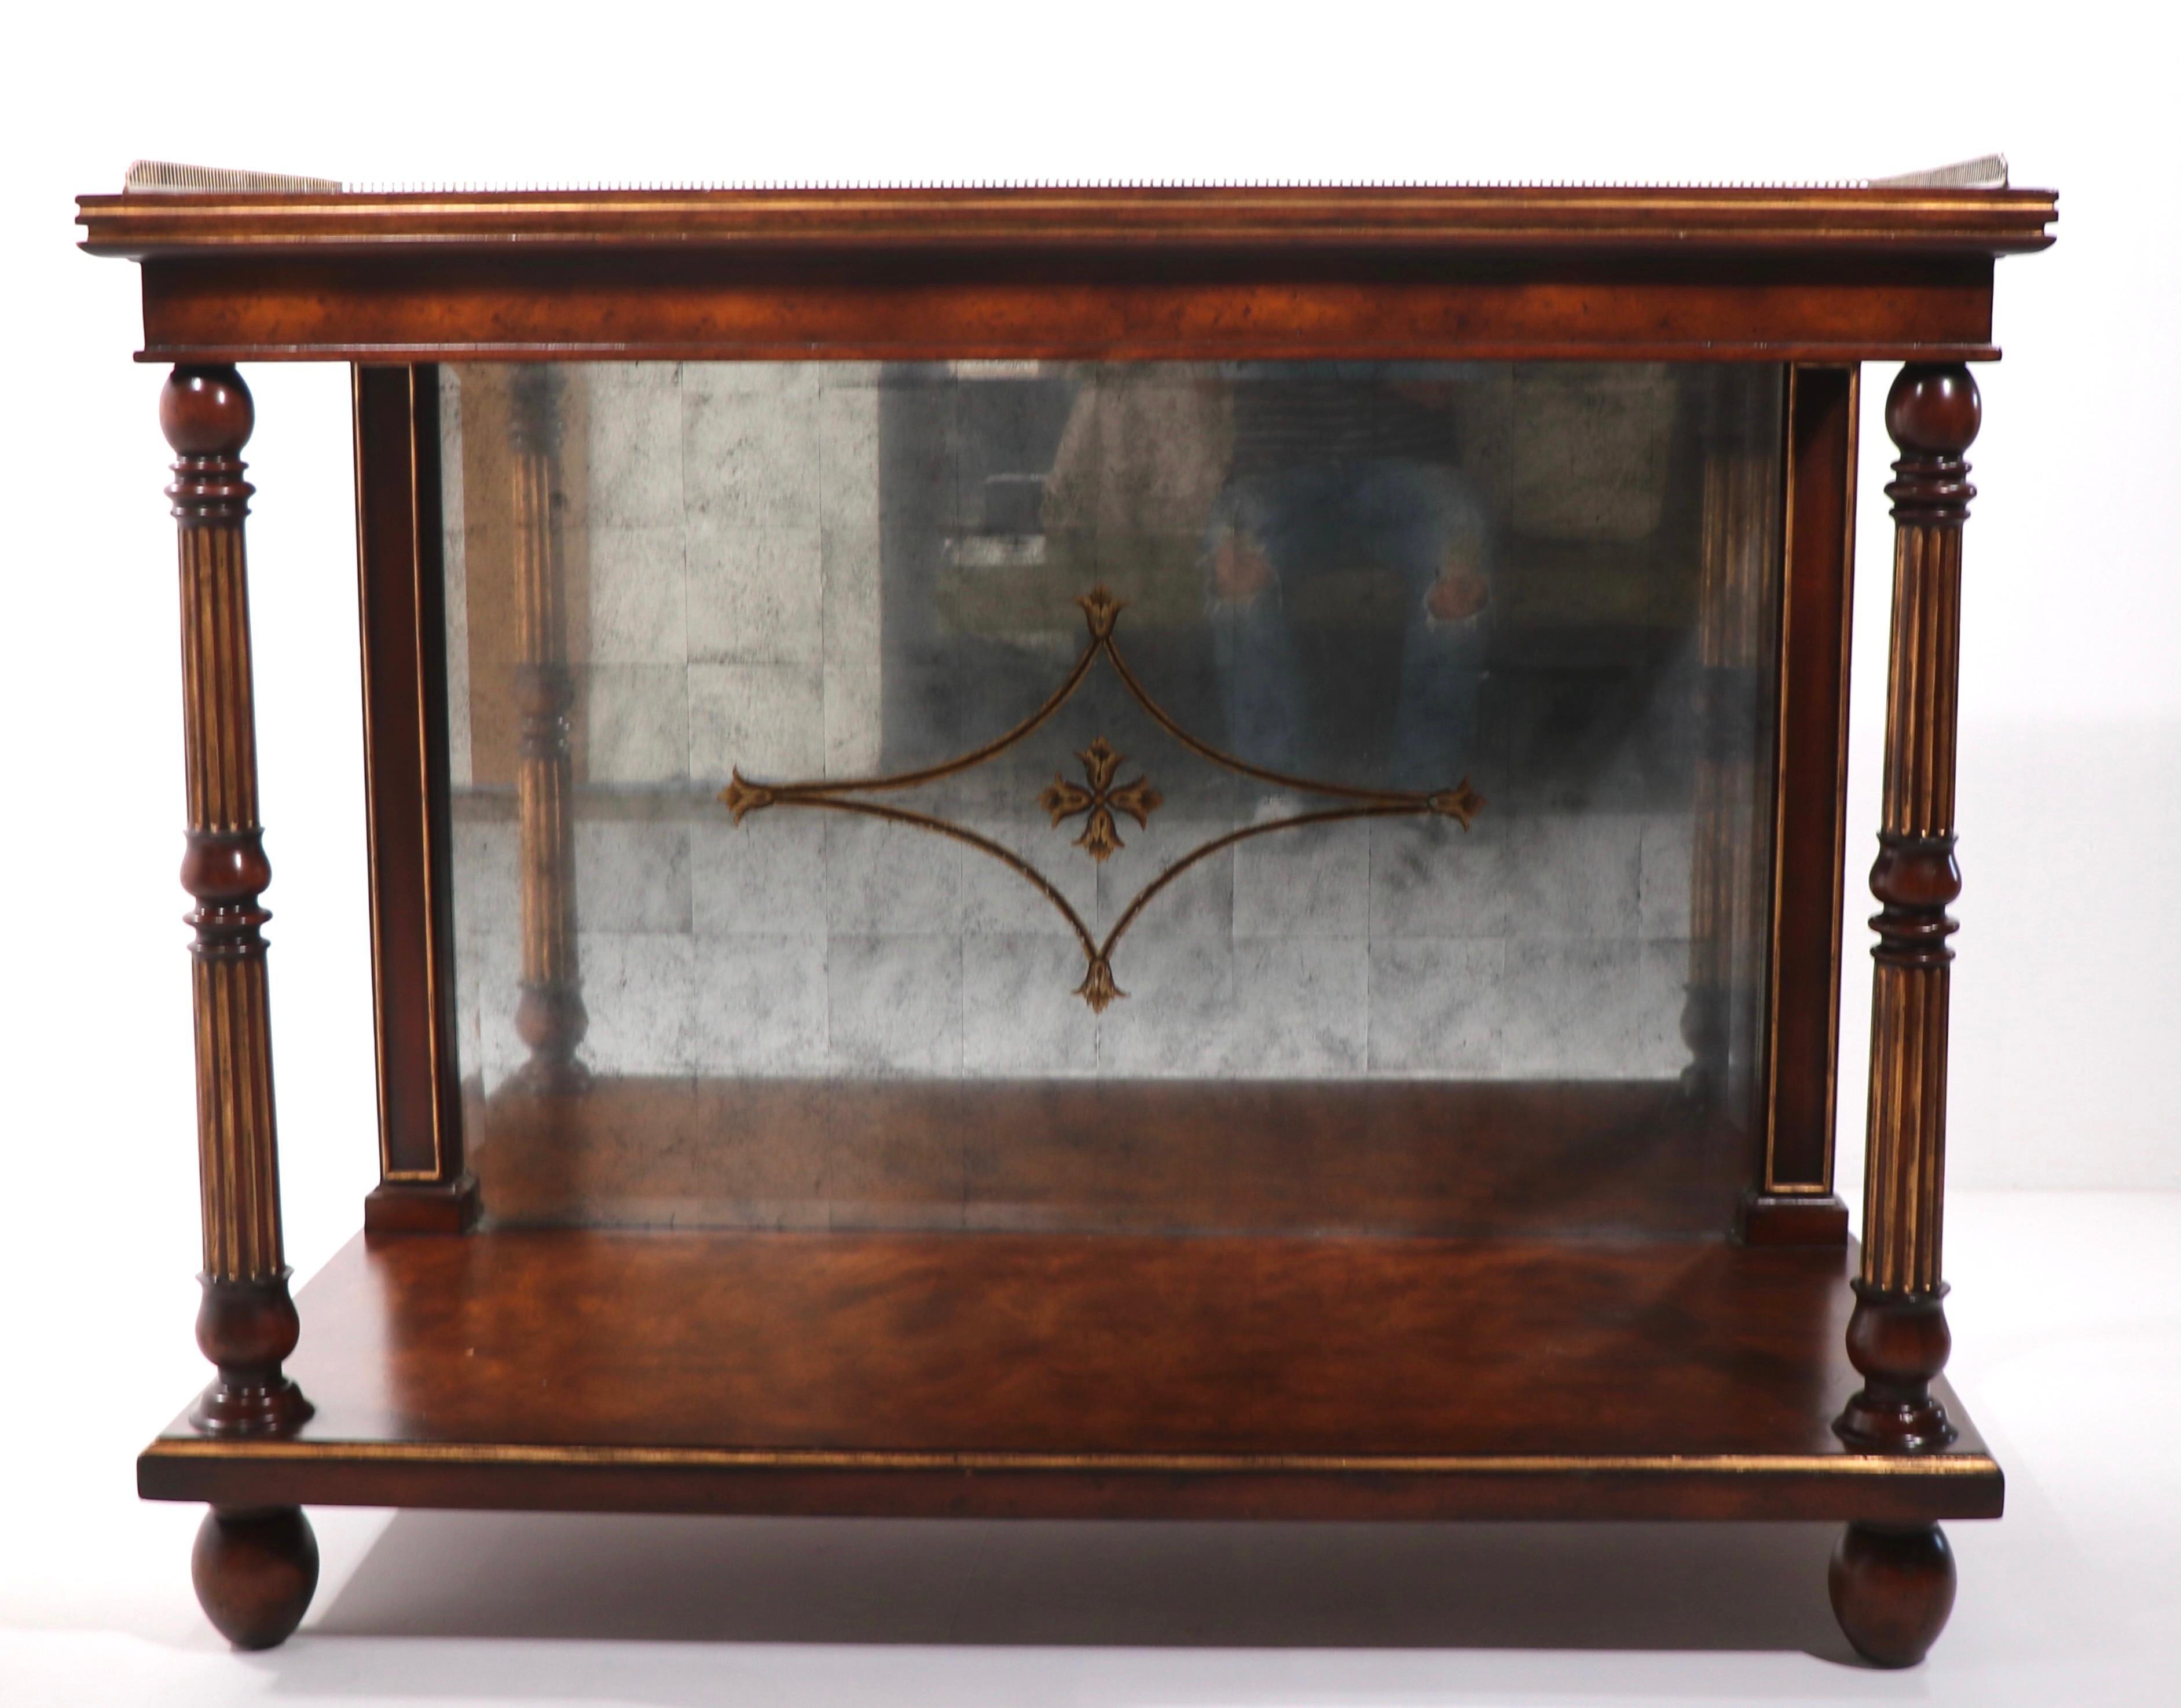 Stylish classical console sideboard by noted furniture maker John Richard from the European Crossroads series. The piece features a solid wood frame with brass gallery , and eglomise mirrored top and backsplash. 
 Total H inc. gallery 37 in x 36 in